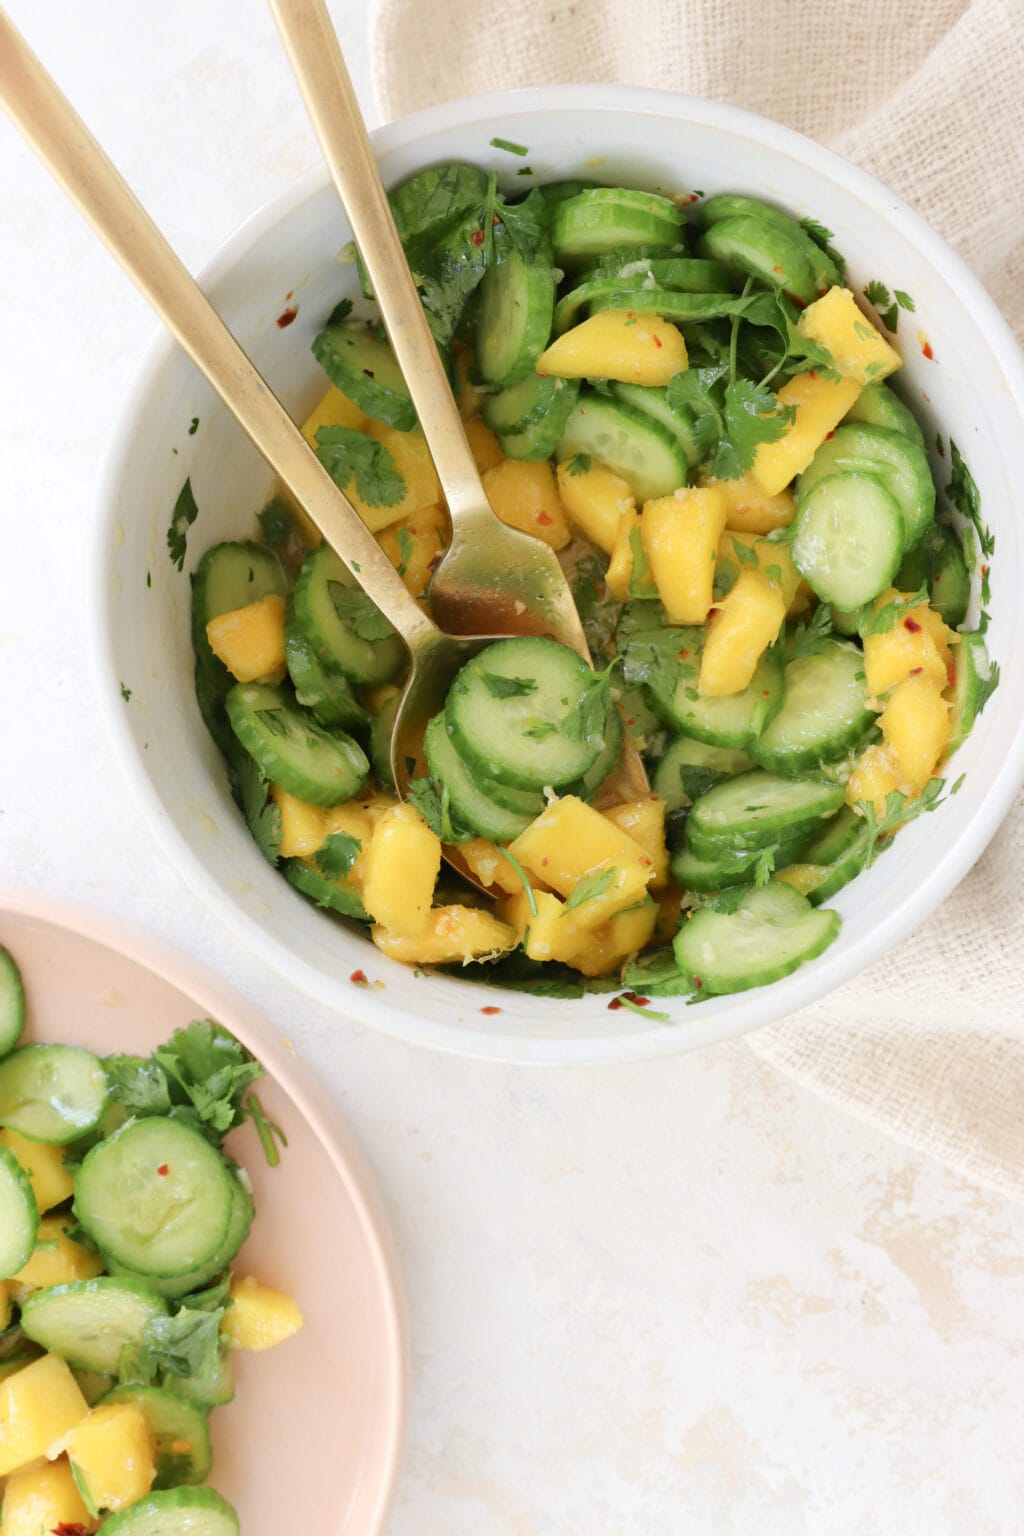 In the left bottom corner is a pink plate. It has sliced cucumber and diced mango. A white bowl is in the middle it is filled with sliced cucumber and diced mango. There are two gold spoons serving the salad